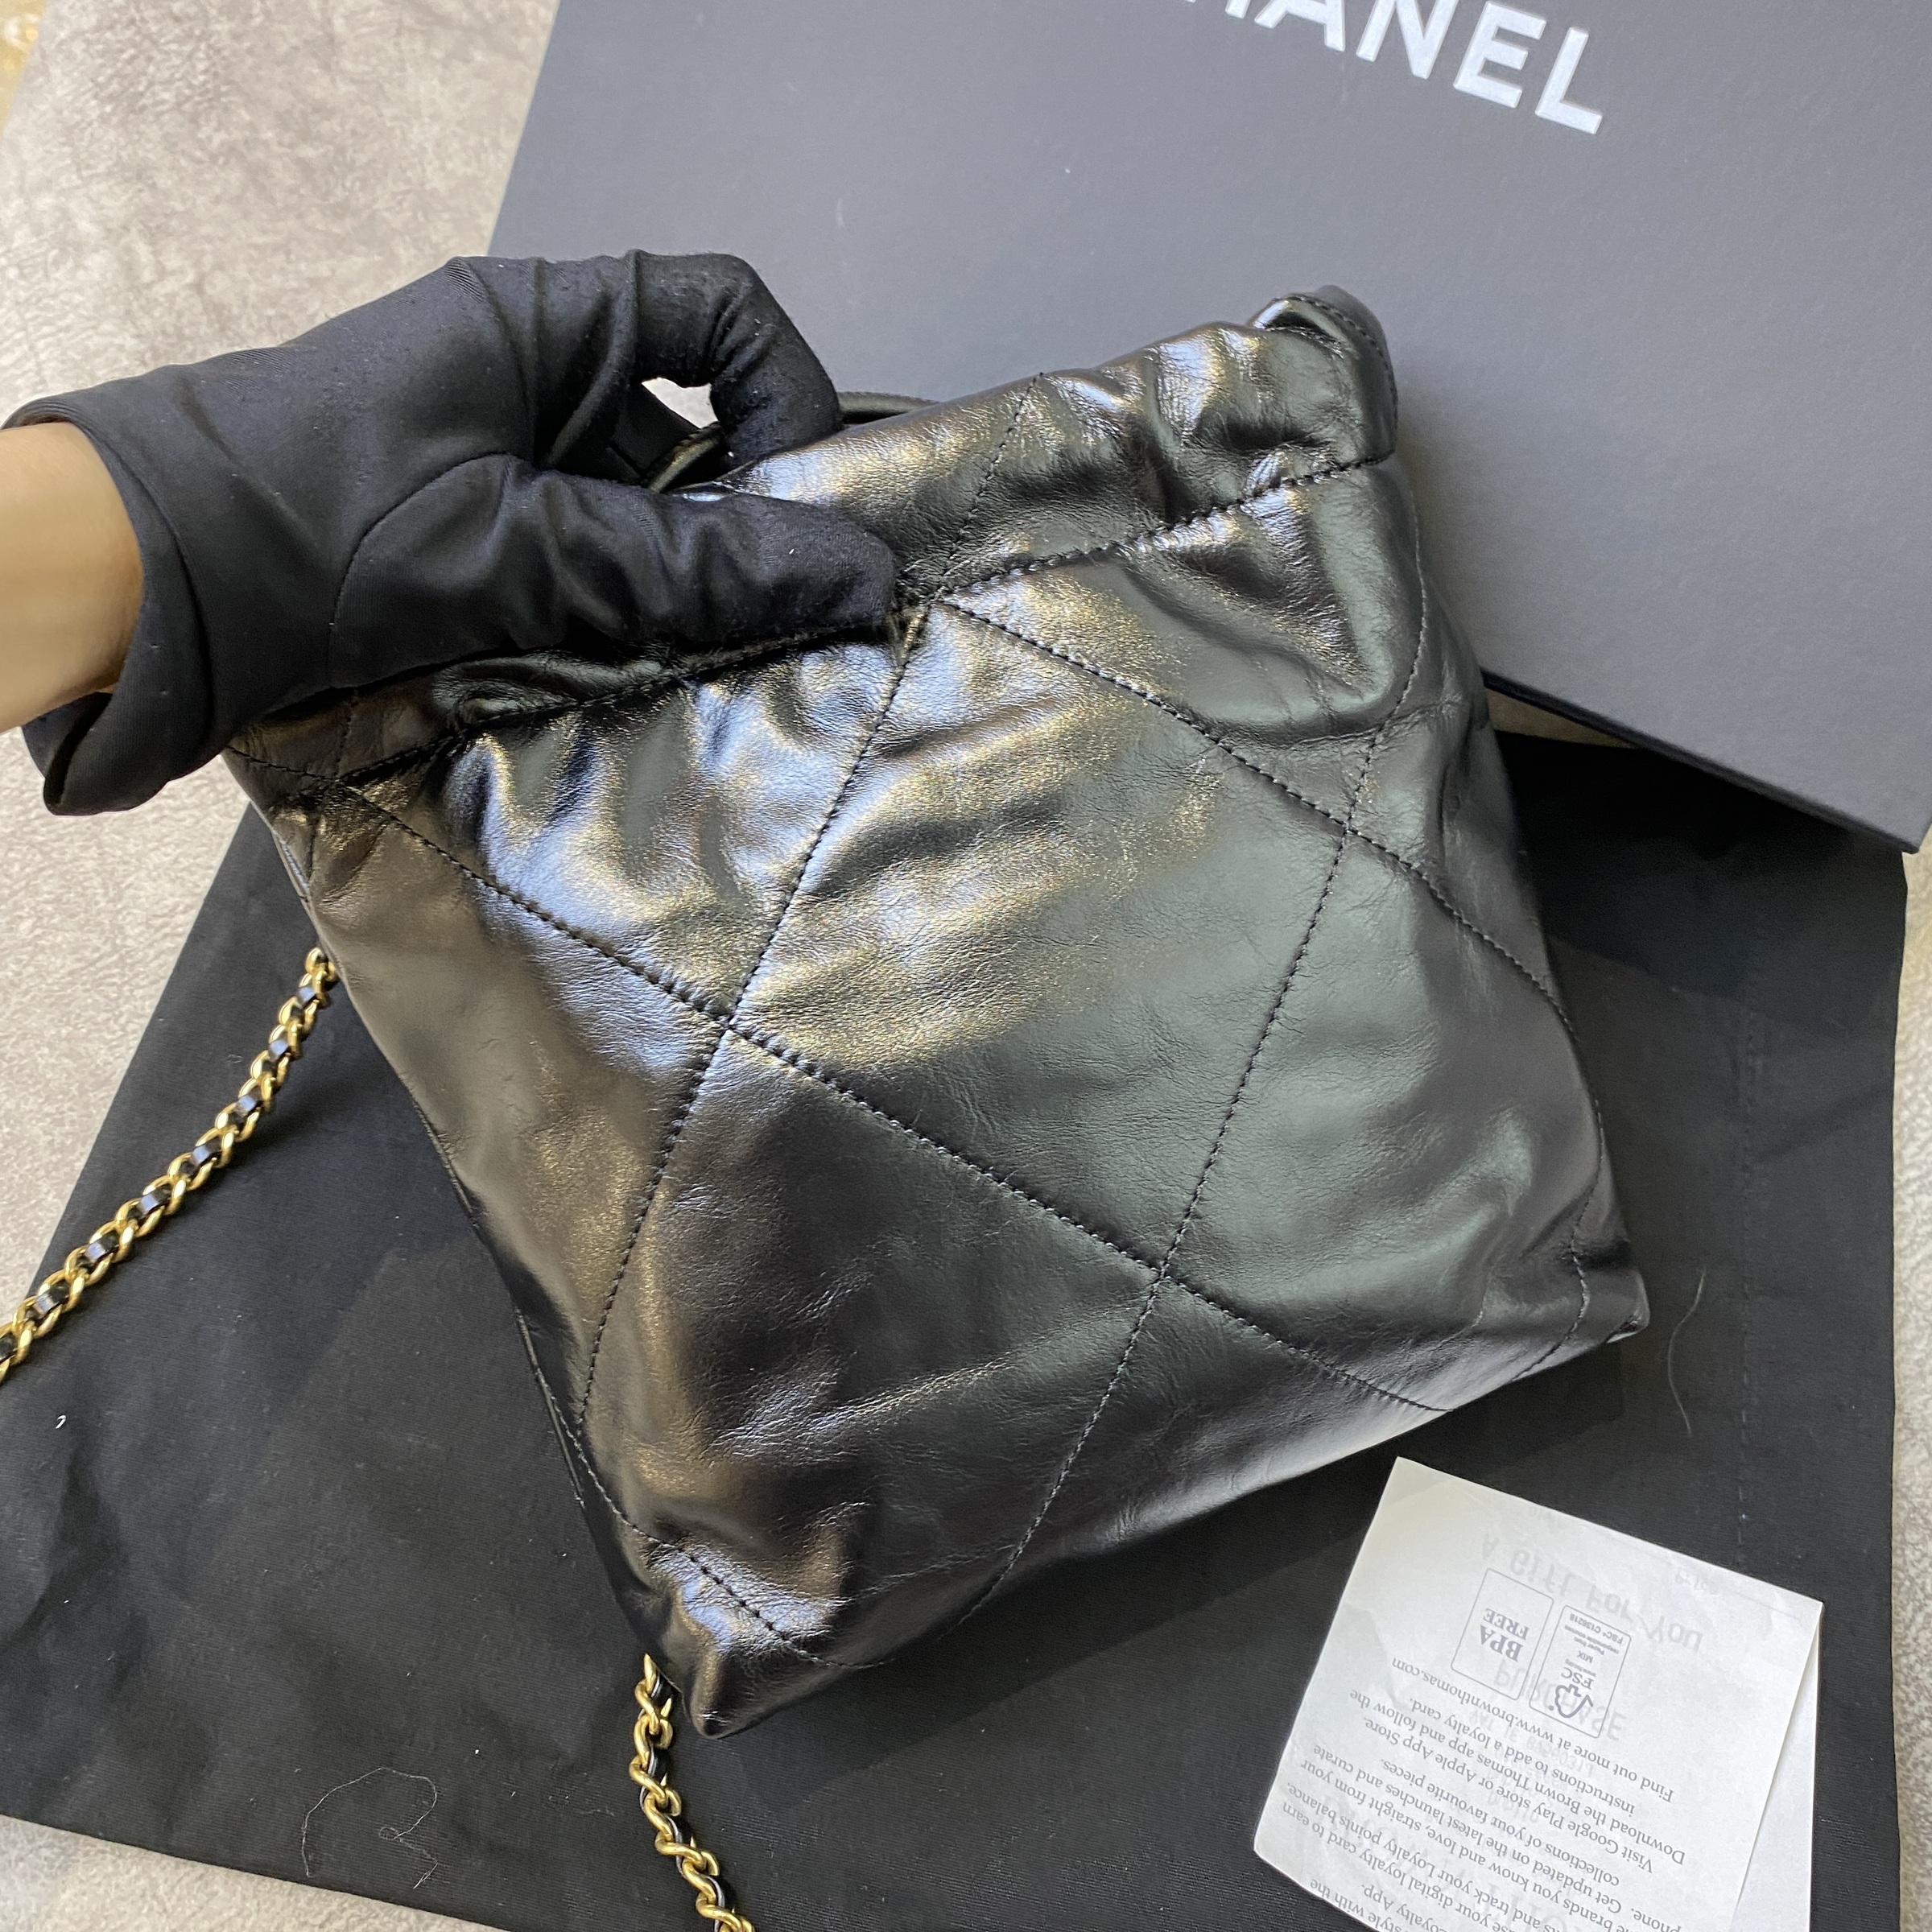 Chanel – Lbite Luxury Branded - Your Trusted Luxury Expert